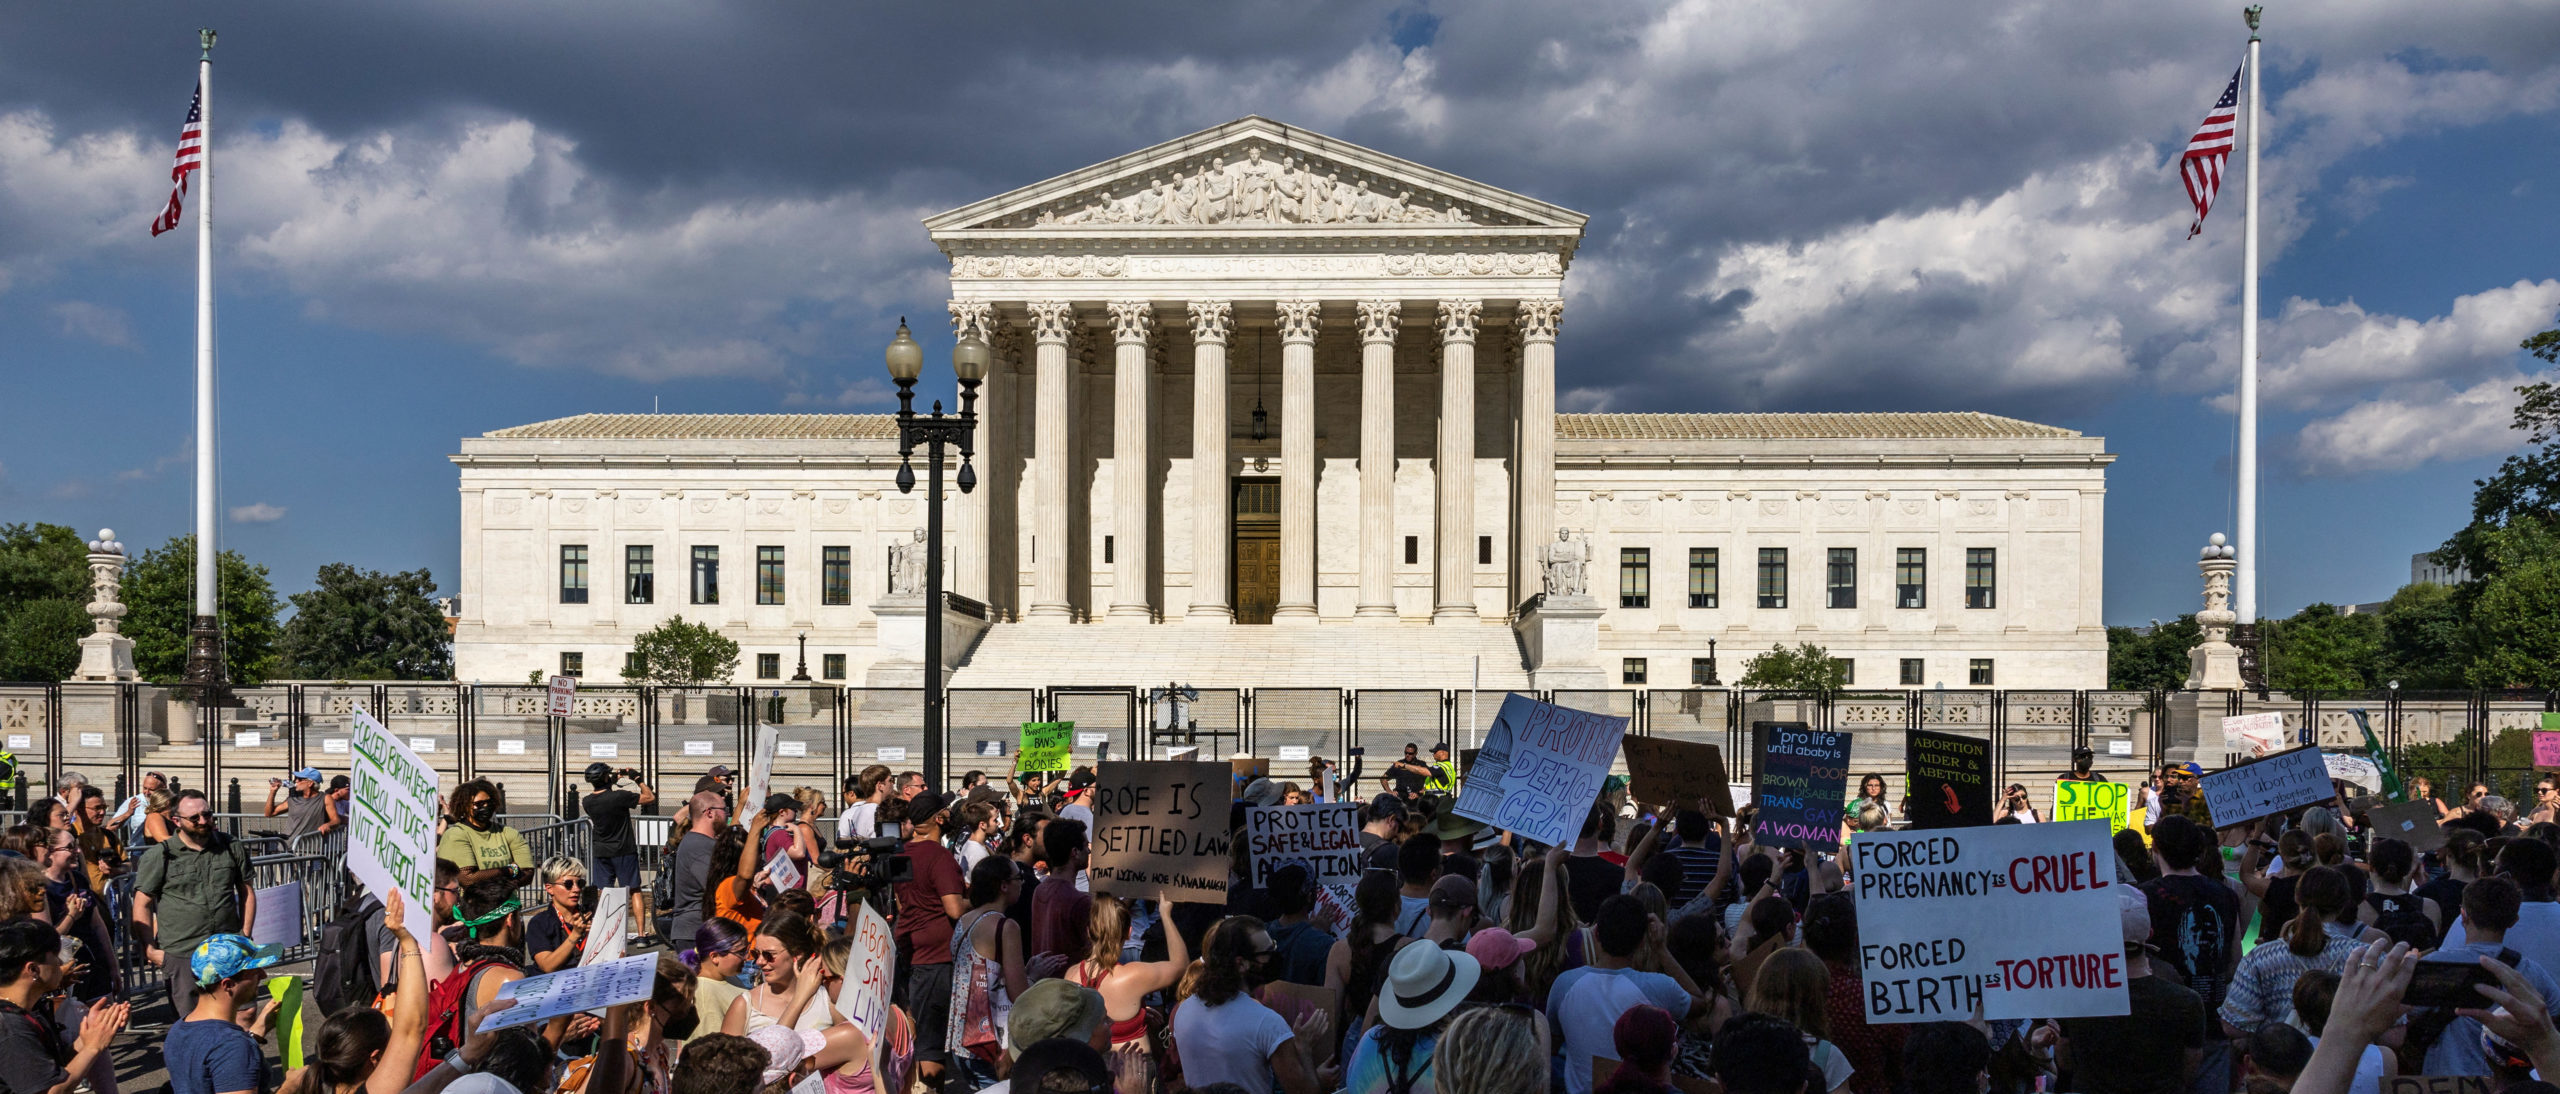 Abortion rights activists demonstrate outside the United States Supreme Court in Washington, U.S., June 25, 2022. (REUTERS/Evelyn Hockstein)